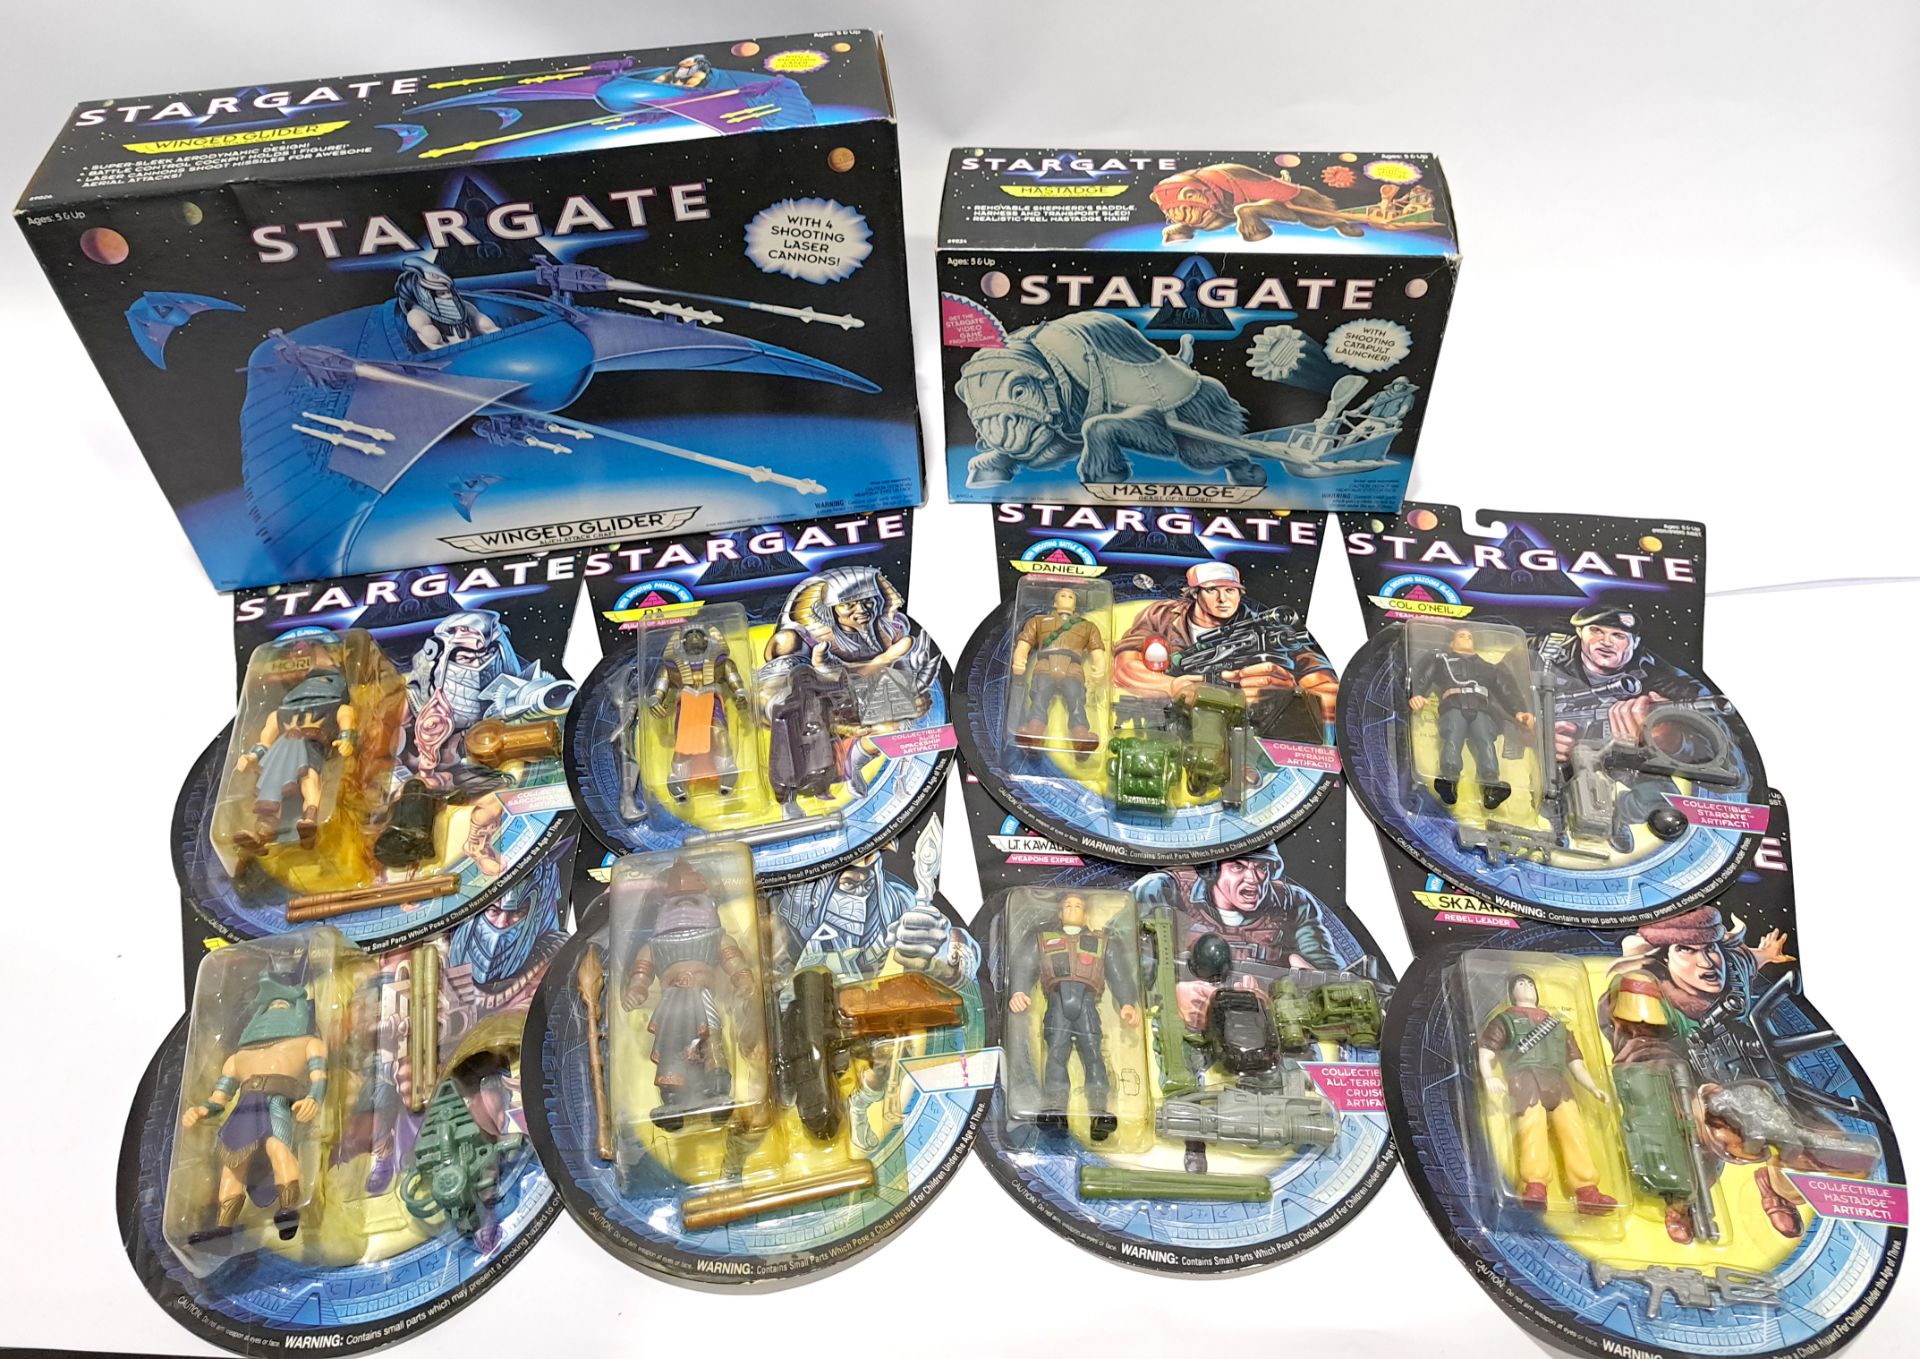 Quantity of Stargate Carded Figures and Vehicle Playsets